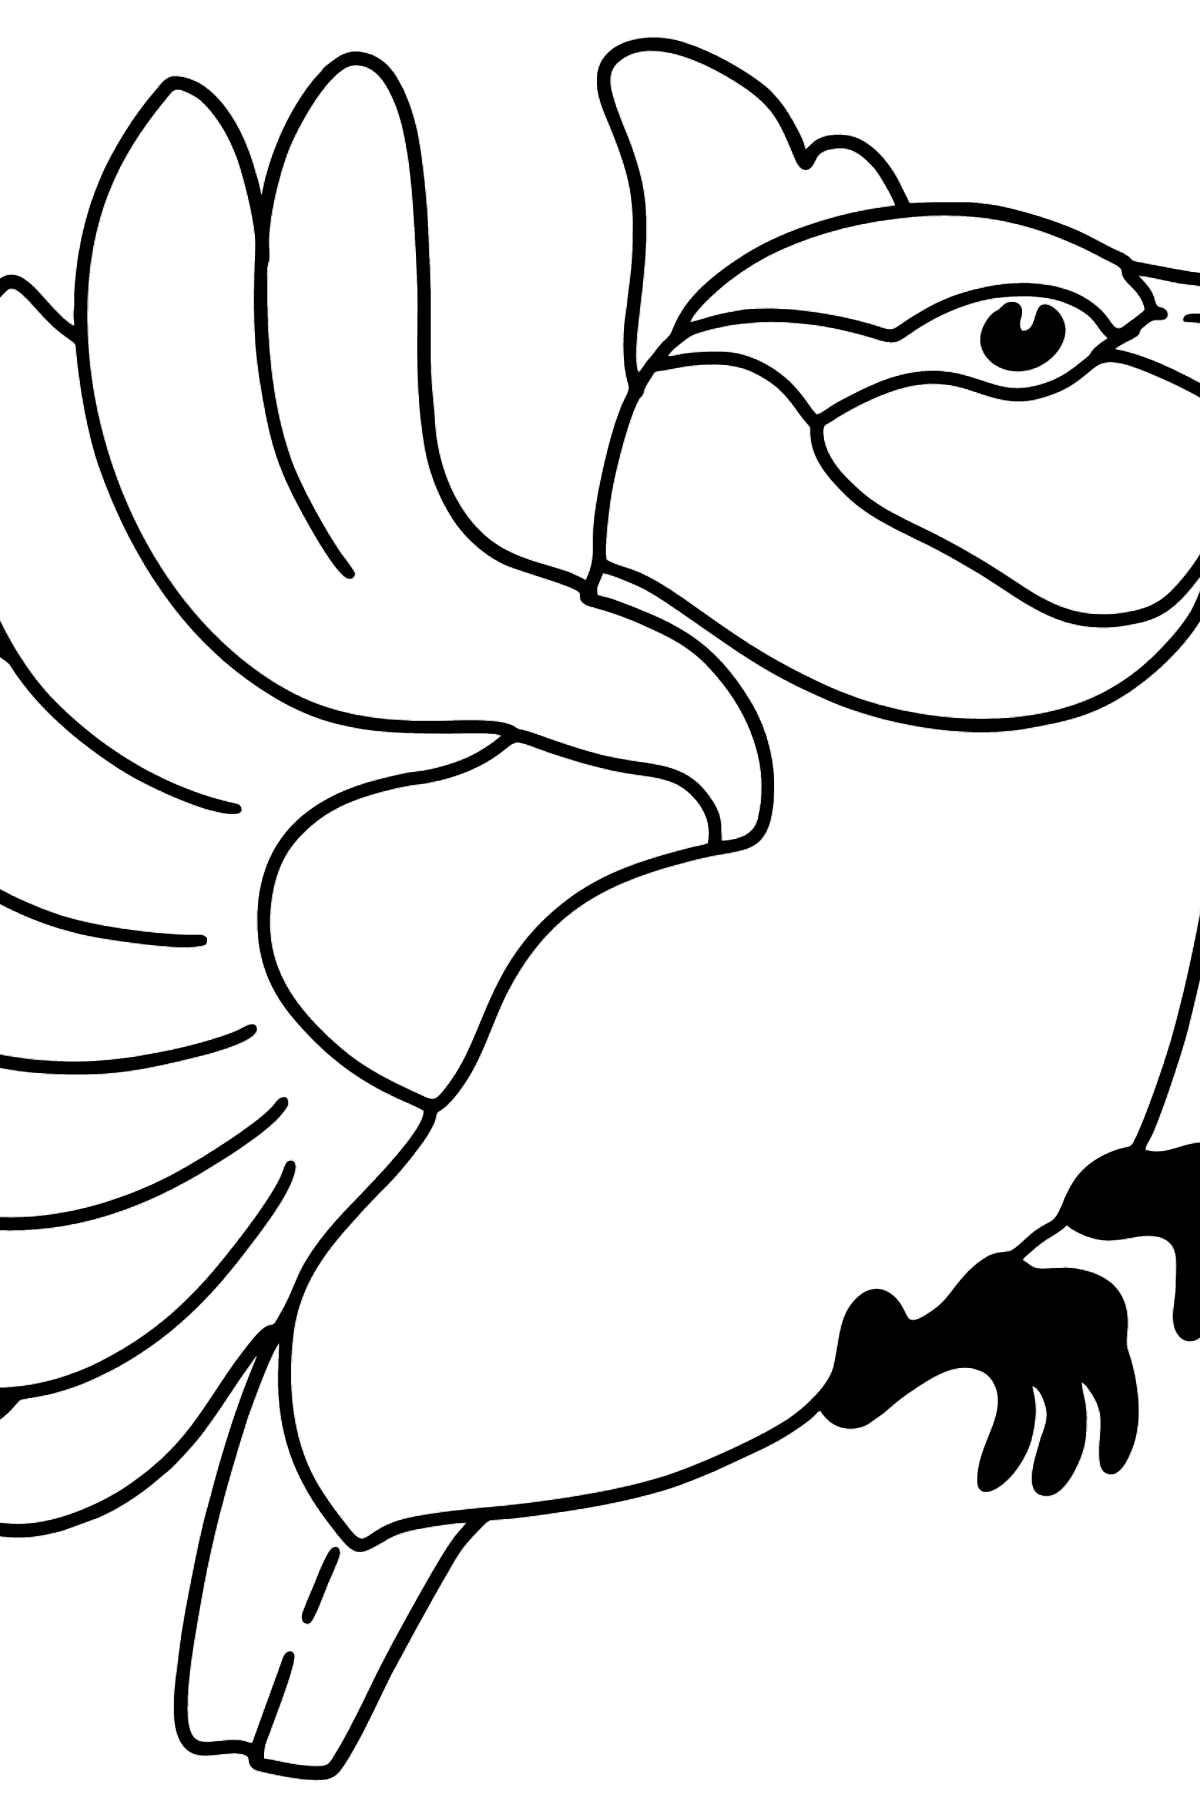 Tit coloring page - Coloring Pages for Kids